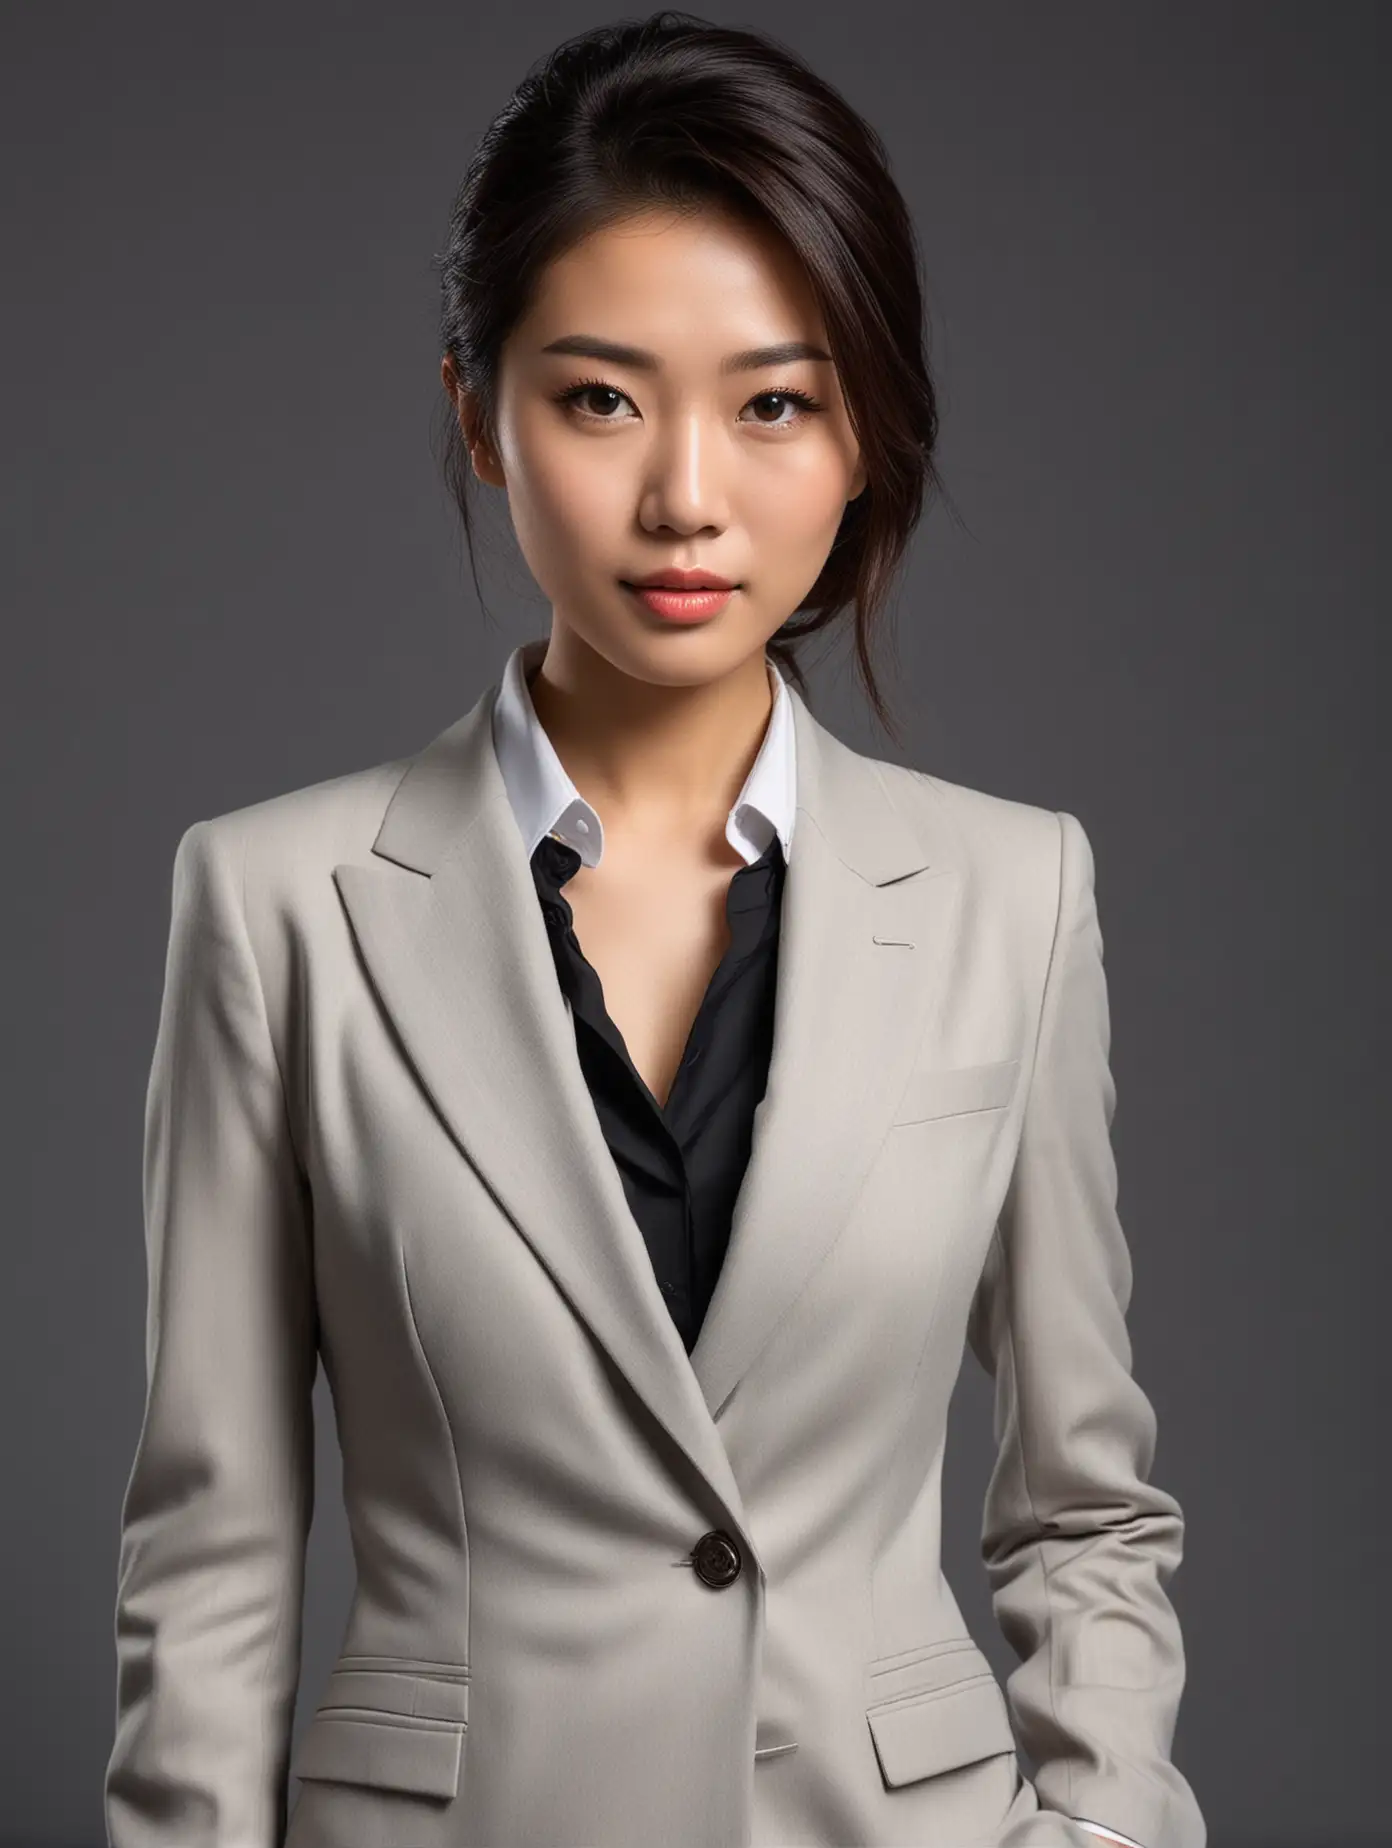 Asian Professionals in HighEnd Suits Posed for Professional Photoshoot